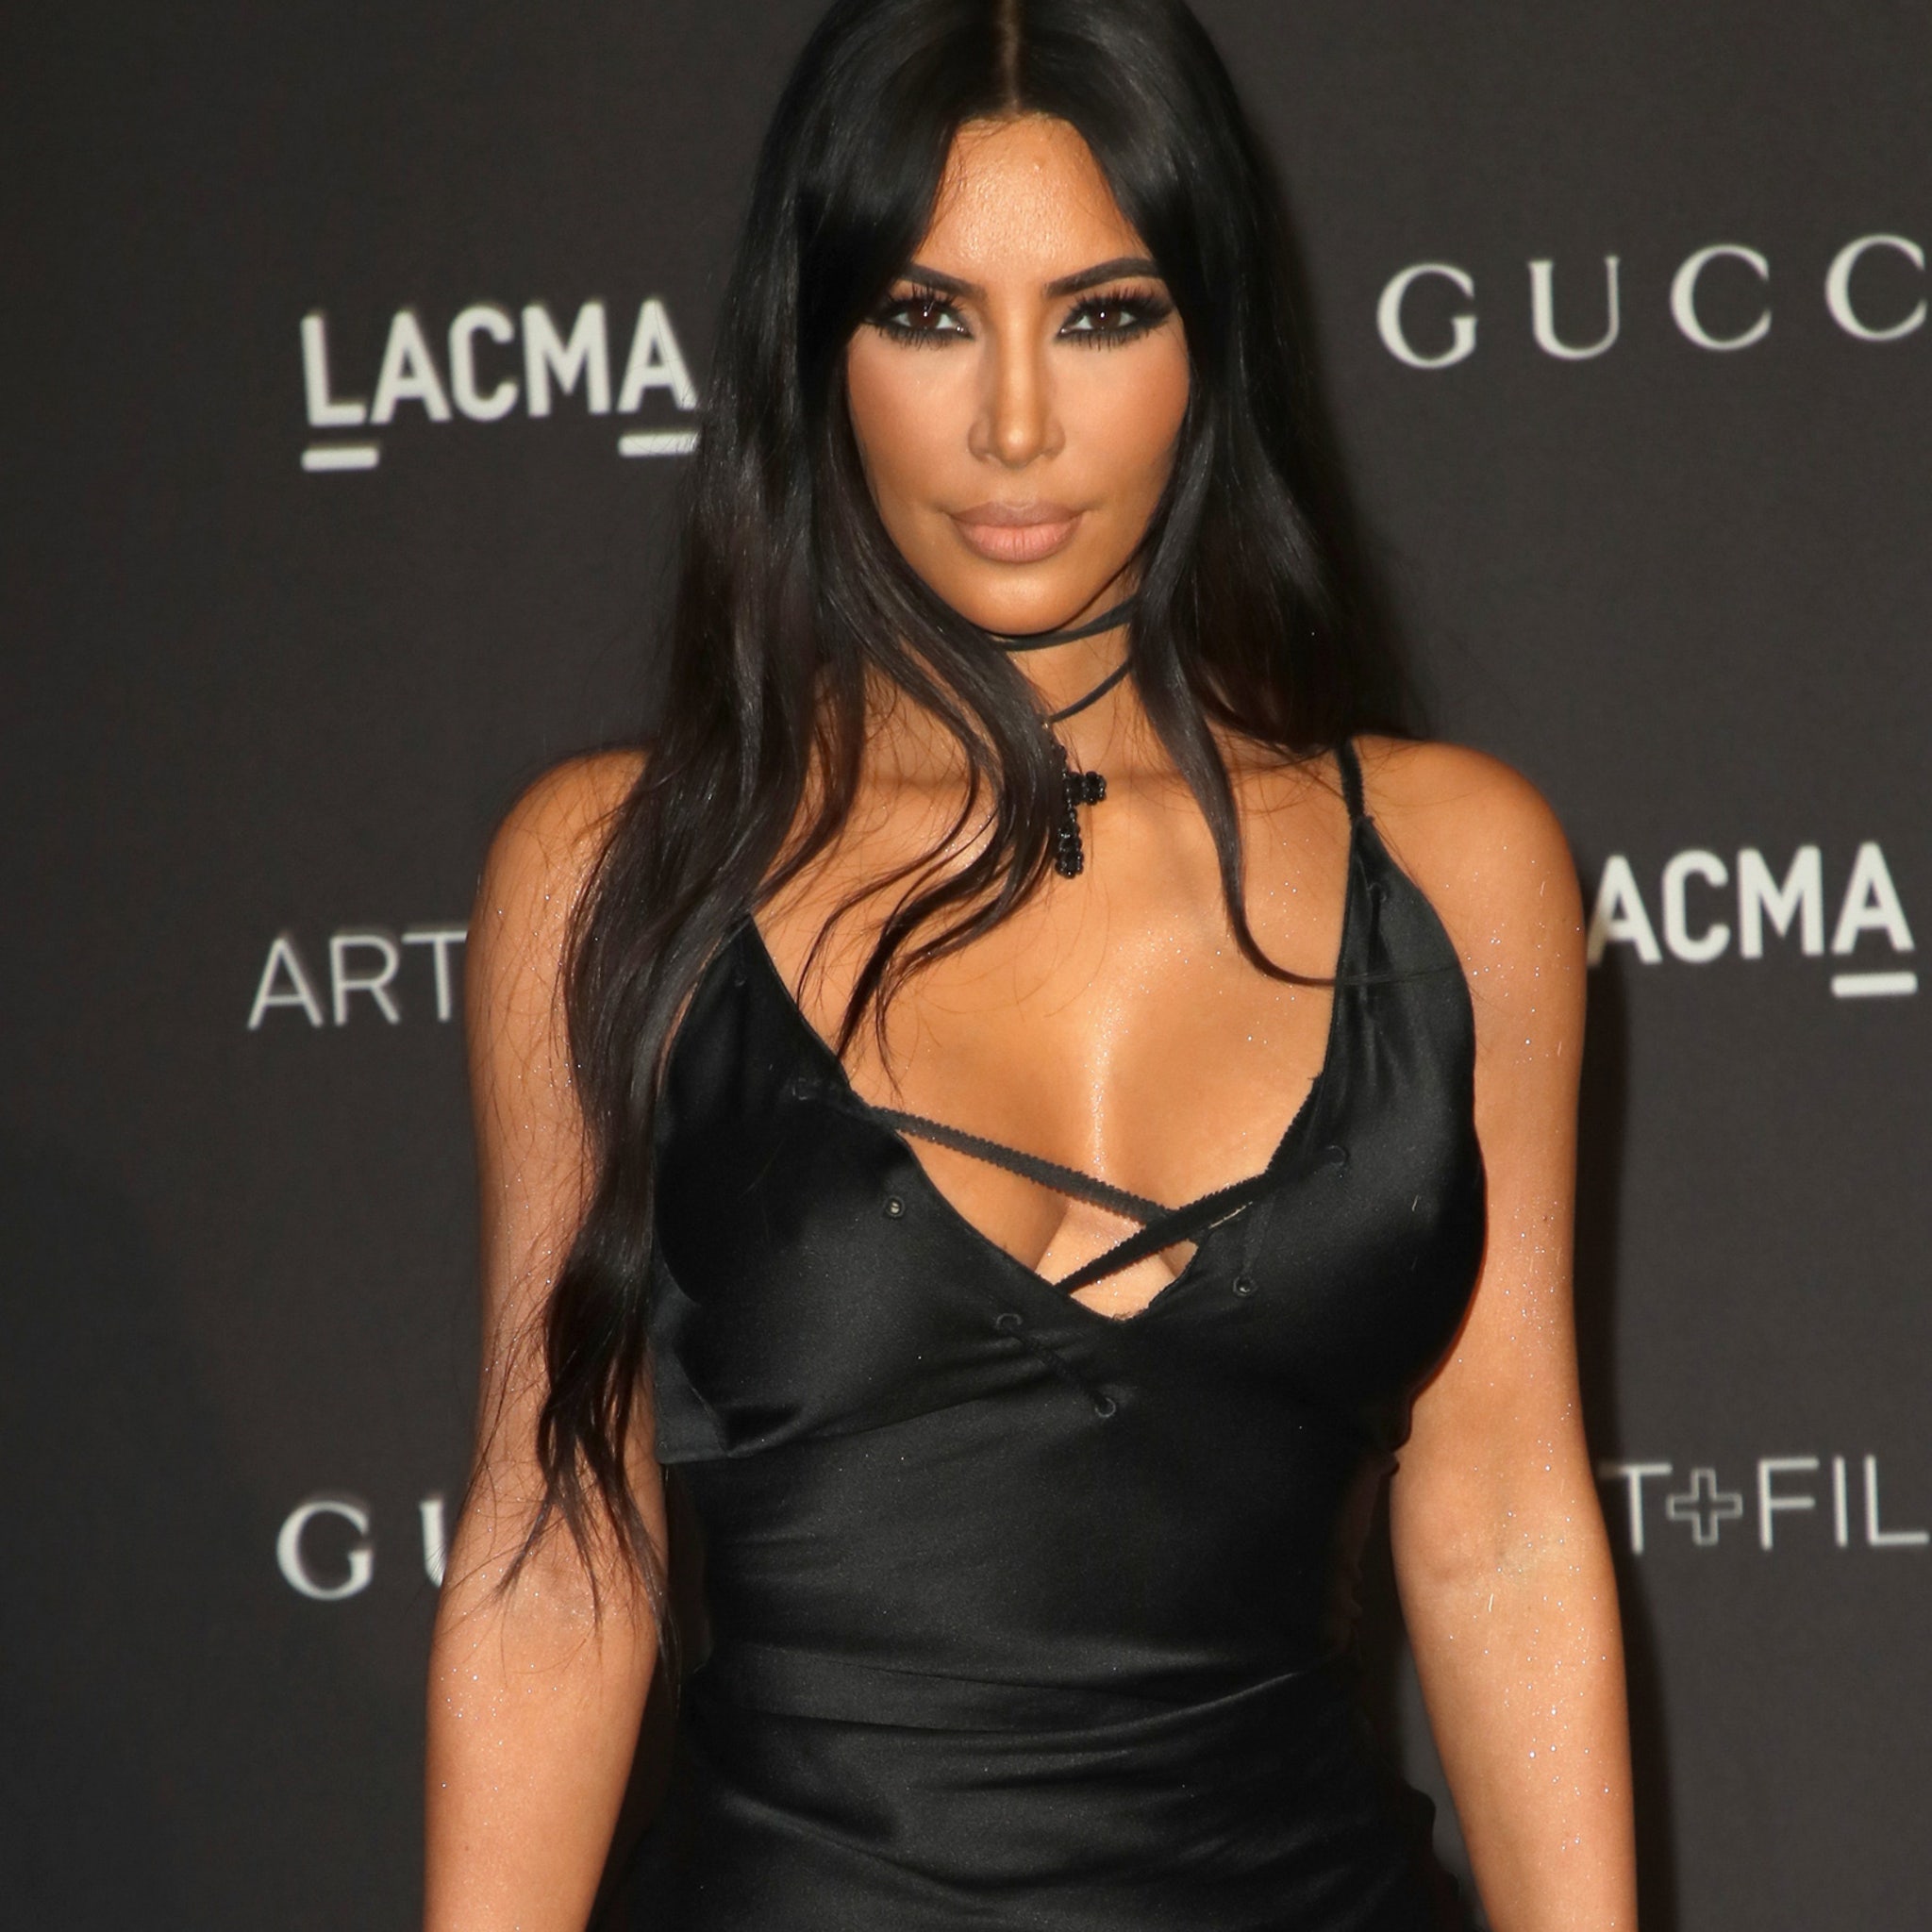 Kim Kardashian Accused of Japanese Cultural Appropriation Over